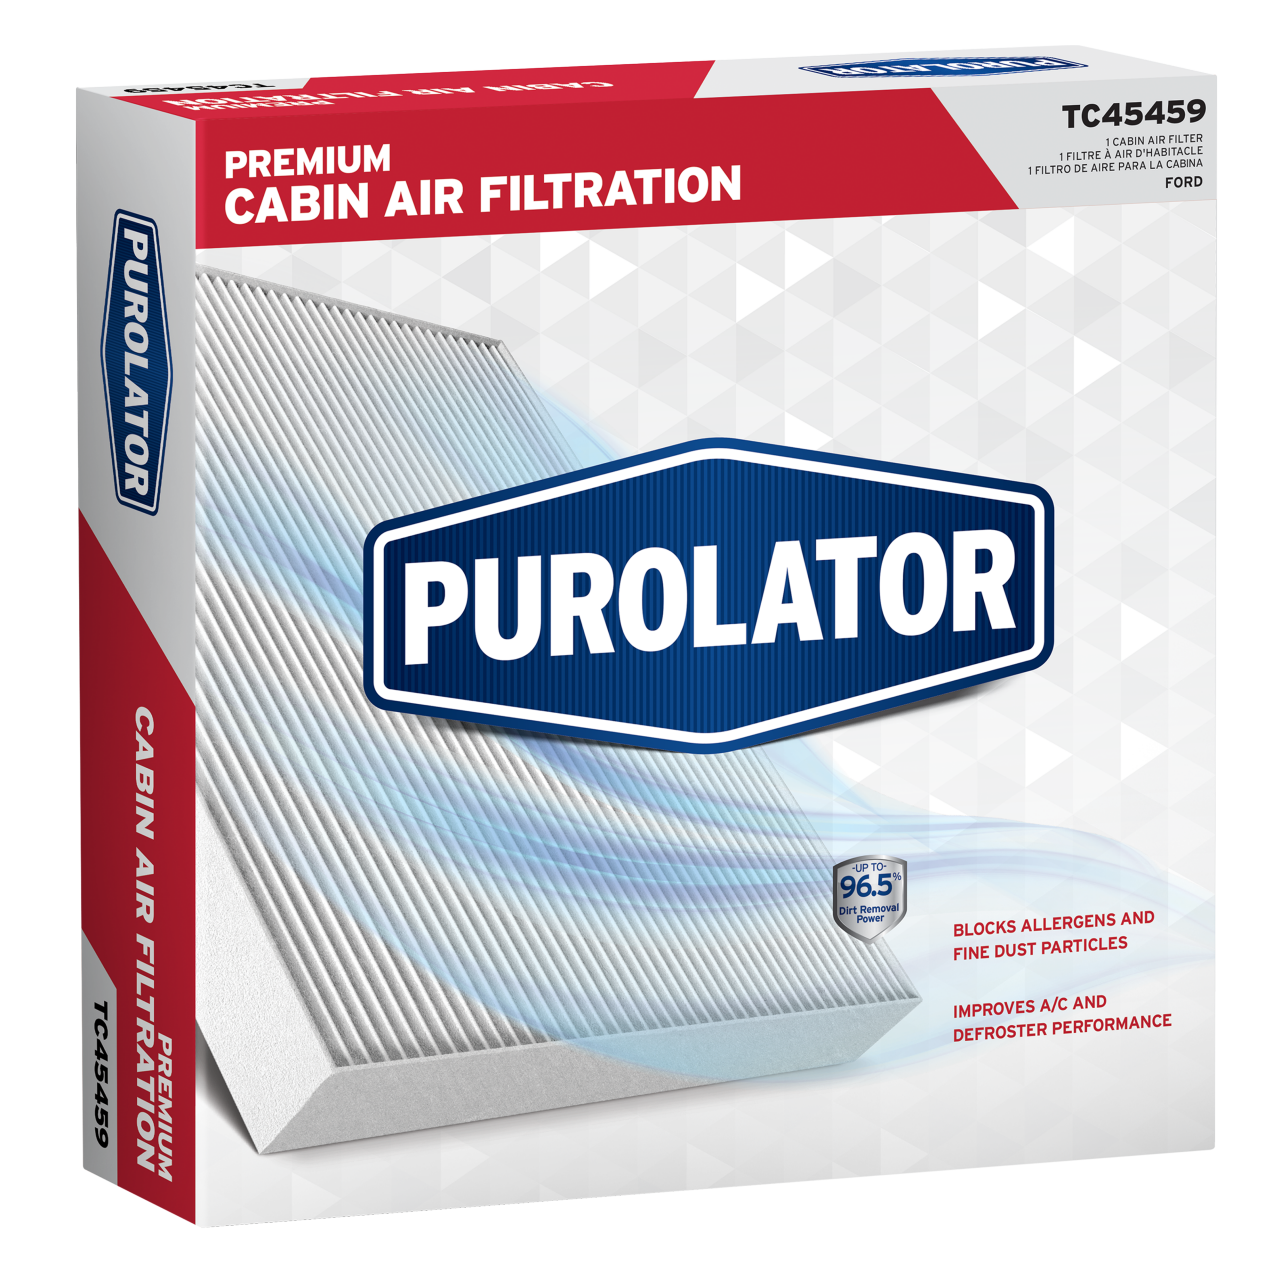 Purolator Cabin Air Filters improve overall driving comfort, encourage better airflow through your vehicle and aid in defroster performance.